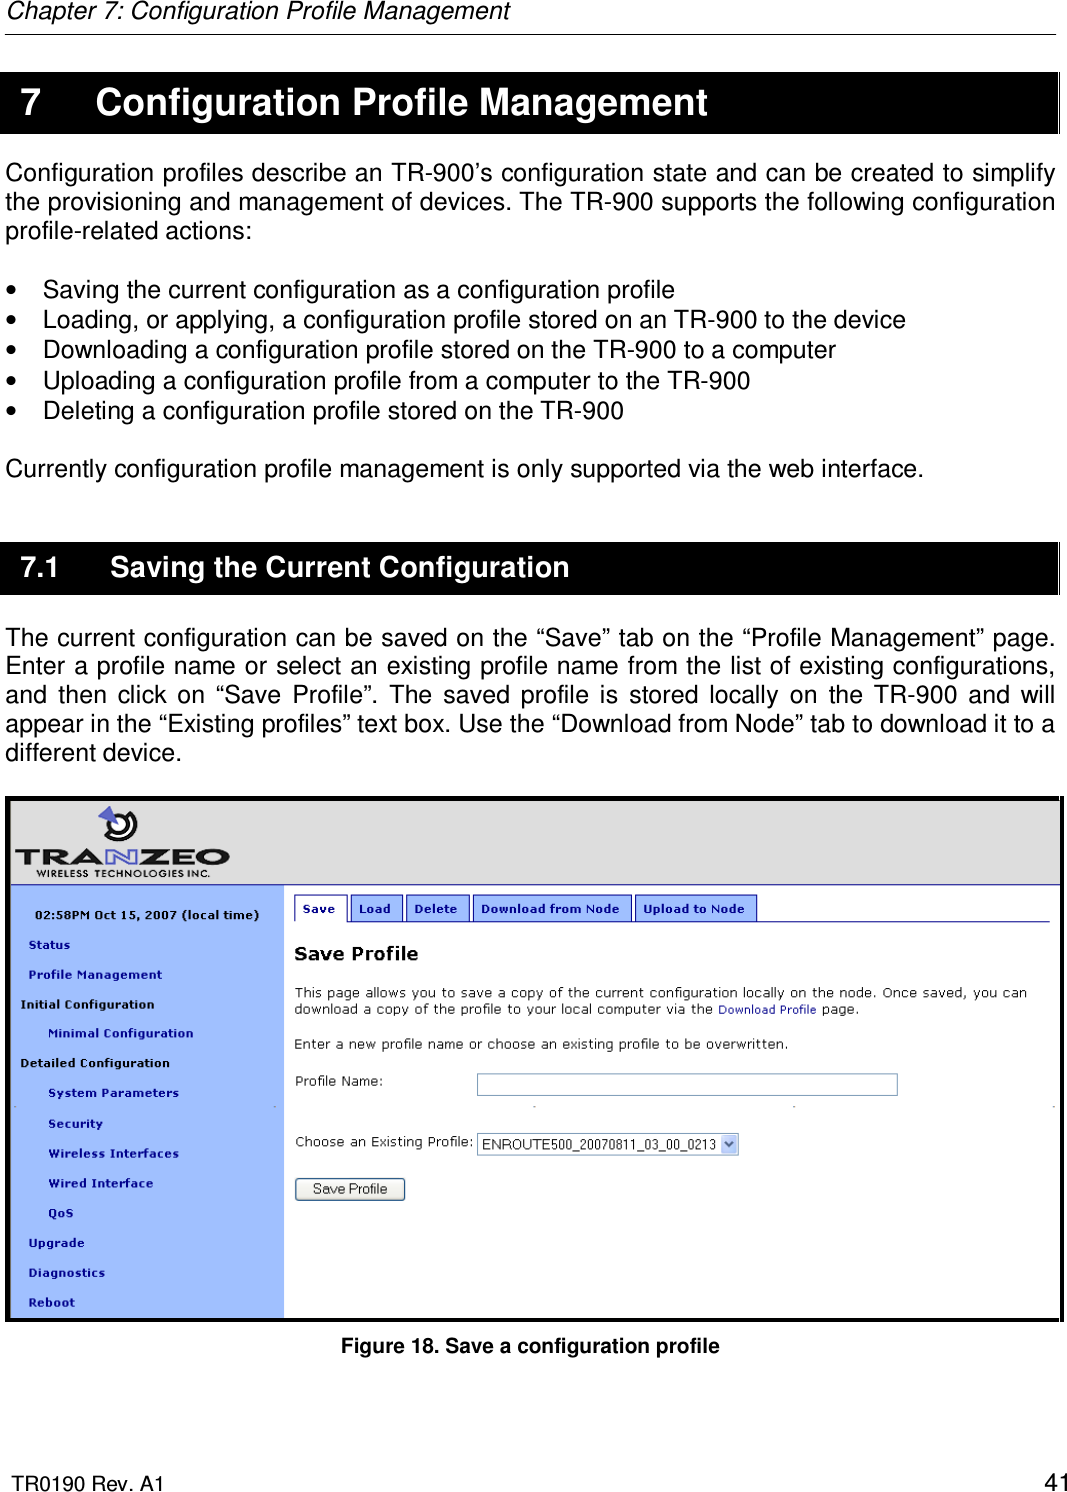 Chapter 7: Configuration Profile Management  TR0190 Rev. A1    41 7  Configuration Profile Management Configuration profiles describe an TR-900’s configuration state and can be created to simplify the provisioning and management of devices. The TR-900 supports the following configuration profile-related actions:  •  Saving the current configuration as a configuration profile •  Loading, or applying, a configuration profile stored on an TR-900 to the device •  Downloading a configuration profile stored on the TR-900 to a computer •  Uploading a configuration profile from a computer to the TR-900 •  Deleting a configuration profile stored on the TR-900  Currently configuration profile management is only supported via the web interface.  7.1  Saving the Current Configuration The current configuration can be saved on the “Save” tab on the “Profile Management” page. Enter a profile name or select an existing profile name from the list of existing configurations, and  then  click  on  “Save  Profile”.  The  saved  profile  is  stored  locally  on  the  TR-900  and  will appear in the “Existing profiles” text box. Use the “Download from Node” tab to download it to a different device.   Figure 18. Save a configuration profile 